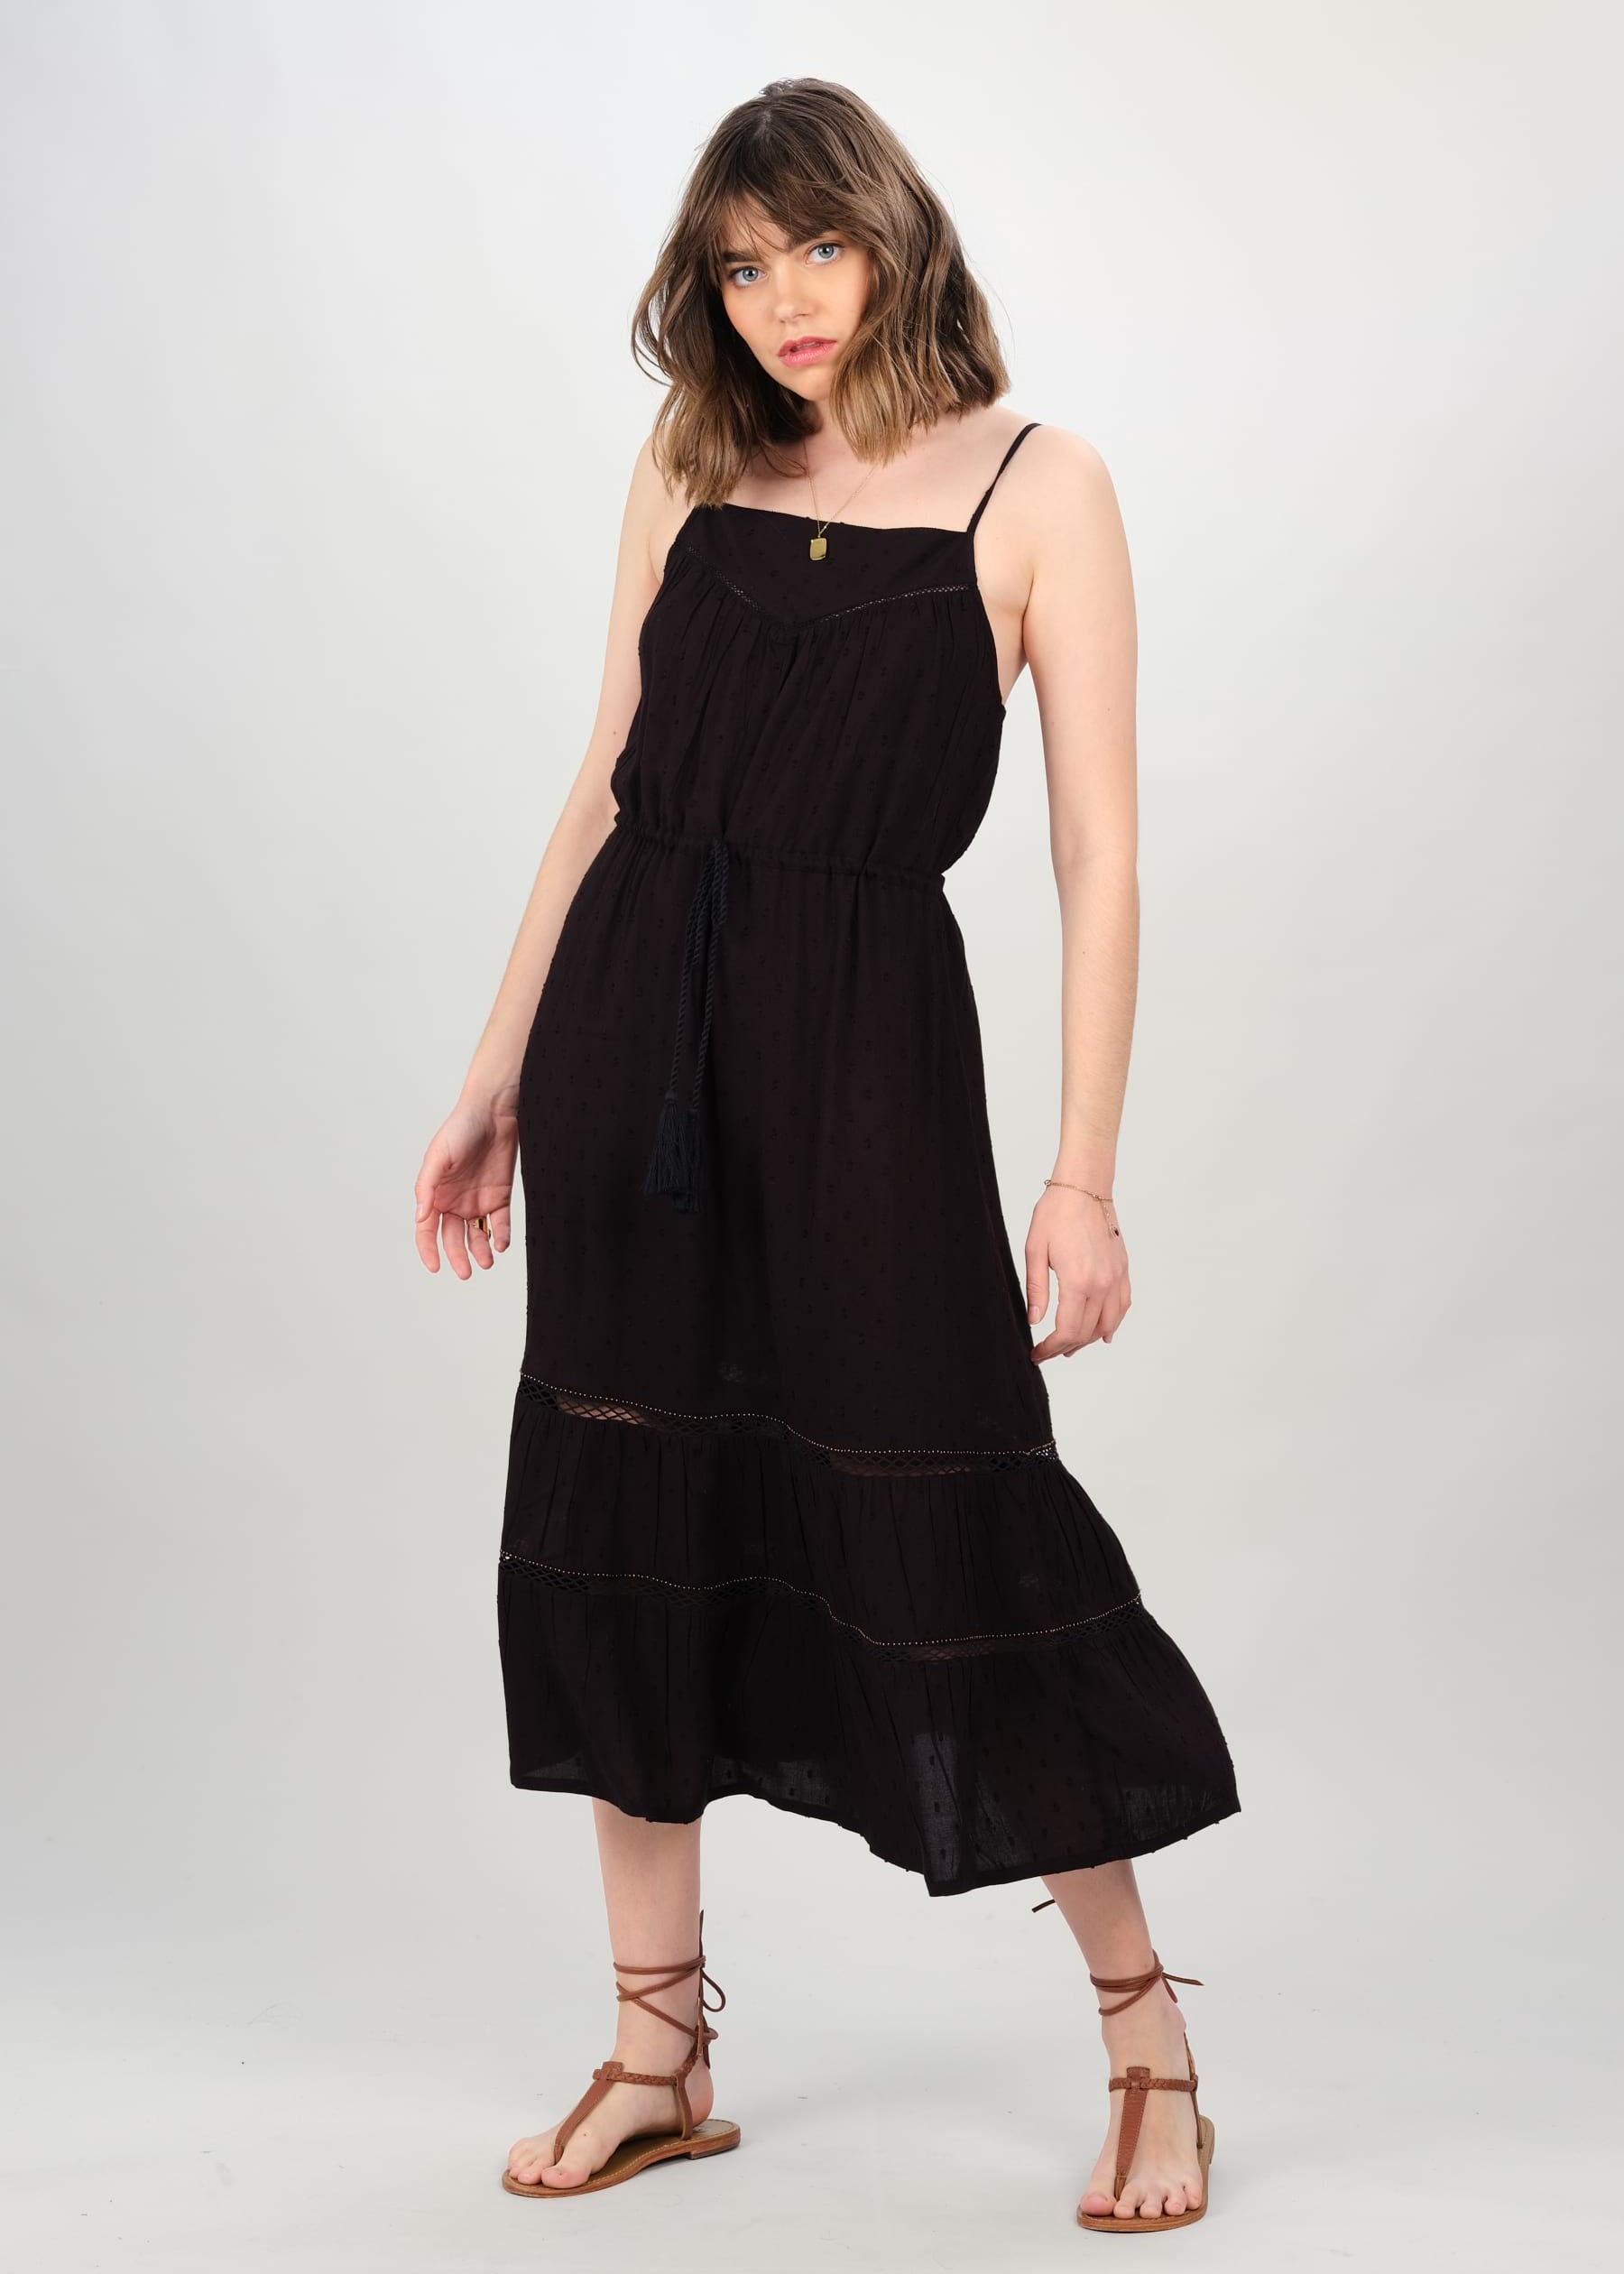 Stein Mart Online: Websites and Dresses Review - The Maxi Dress